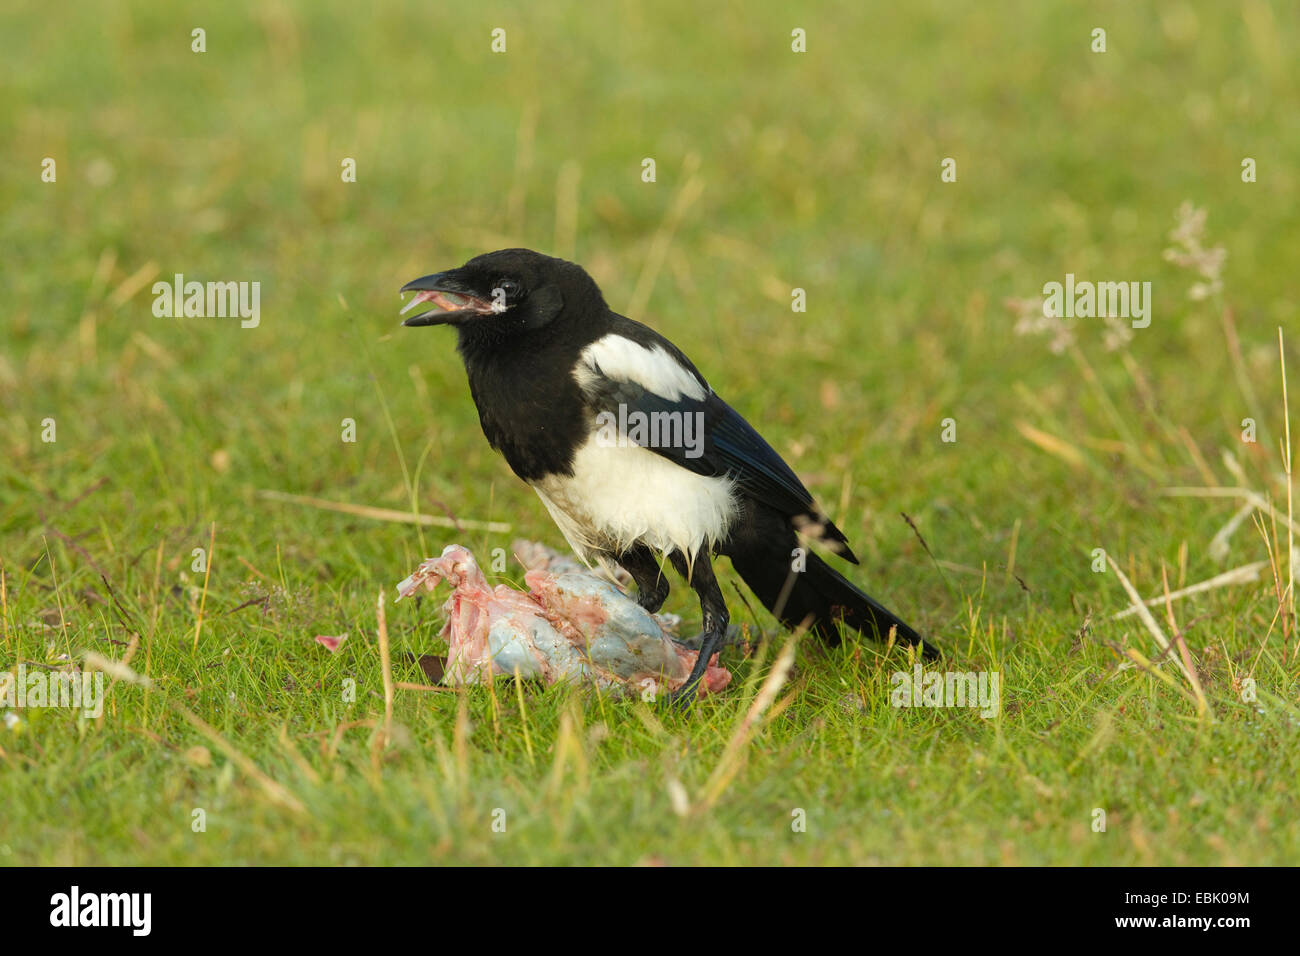 black-billed magpie (Pica pica), feeding on dead rabbit, Germany Stock Photo